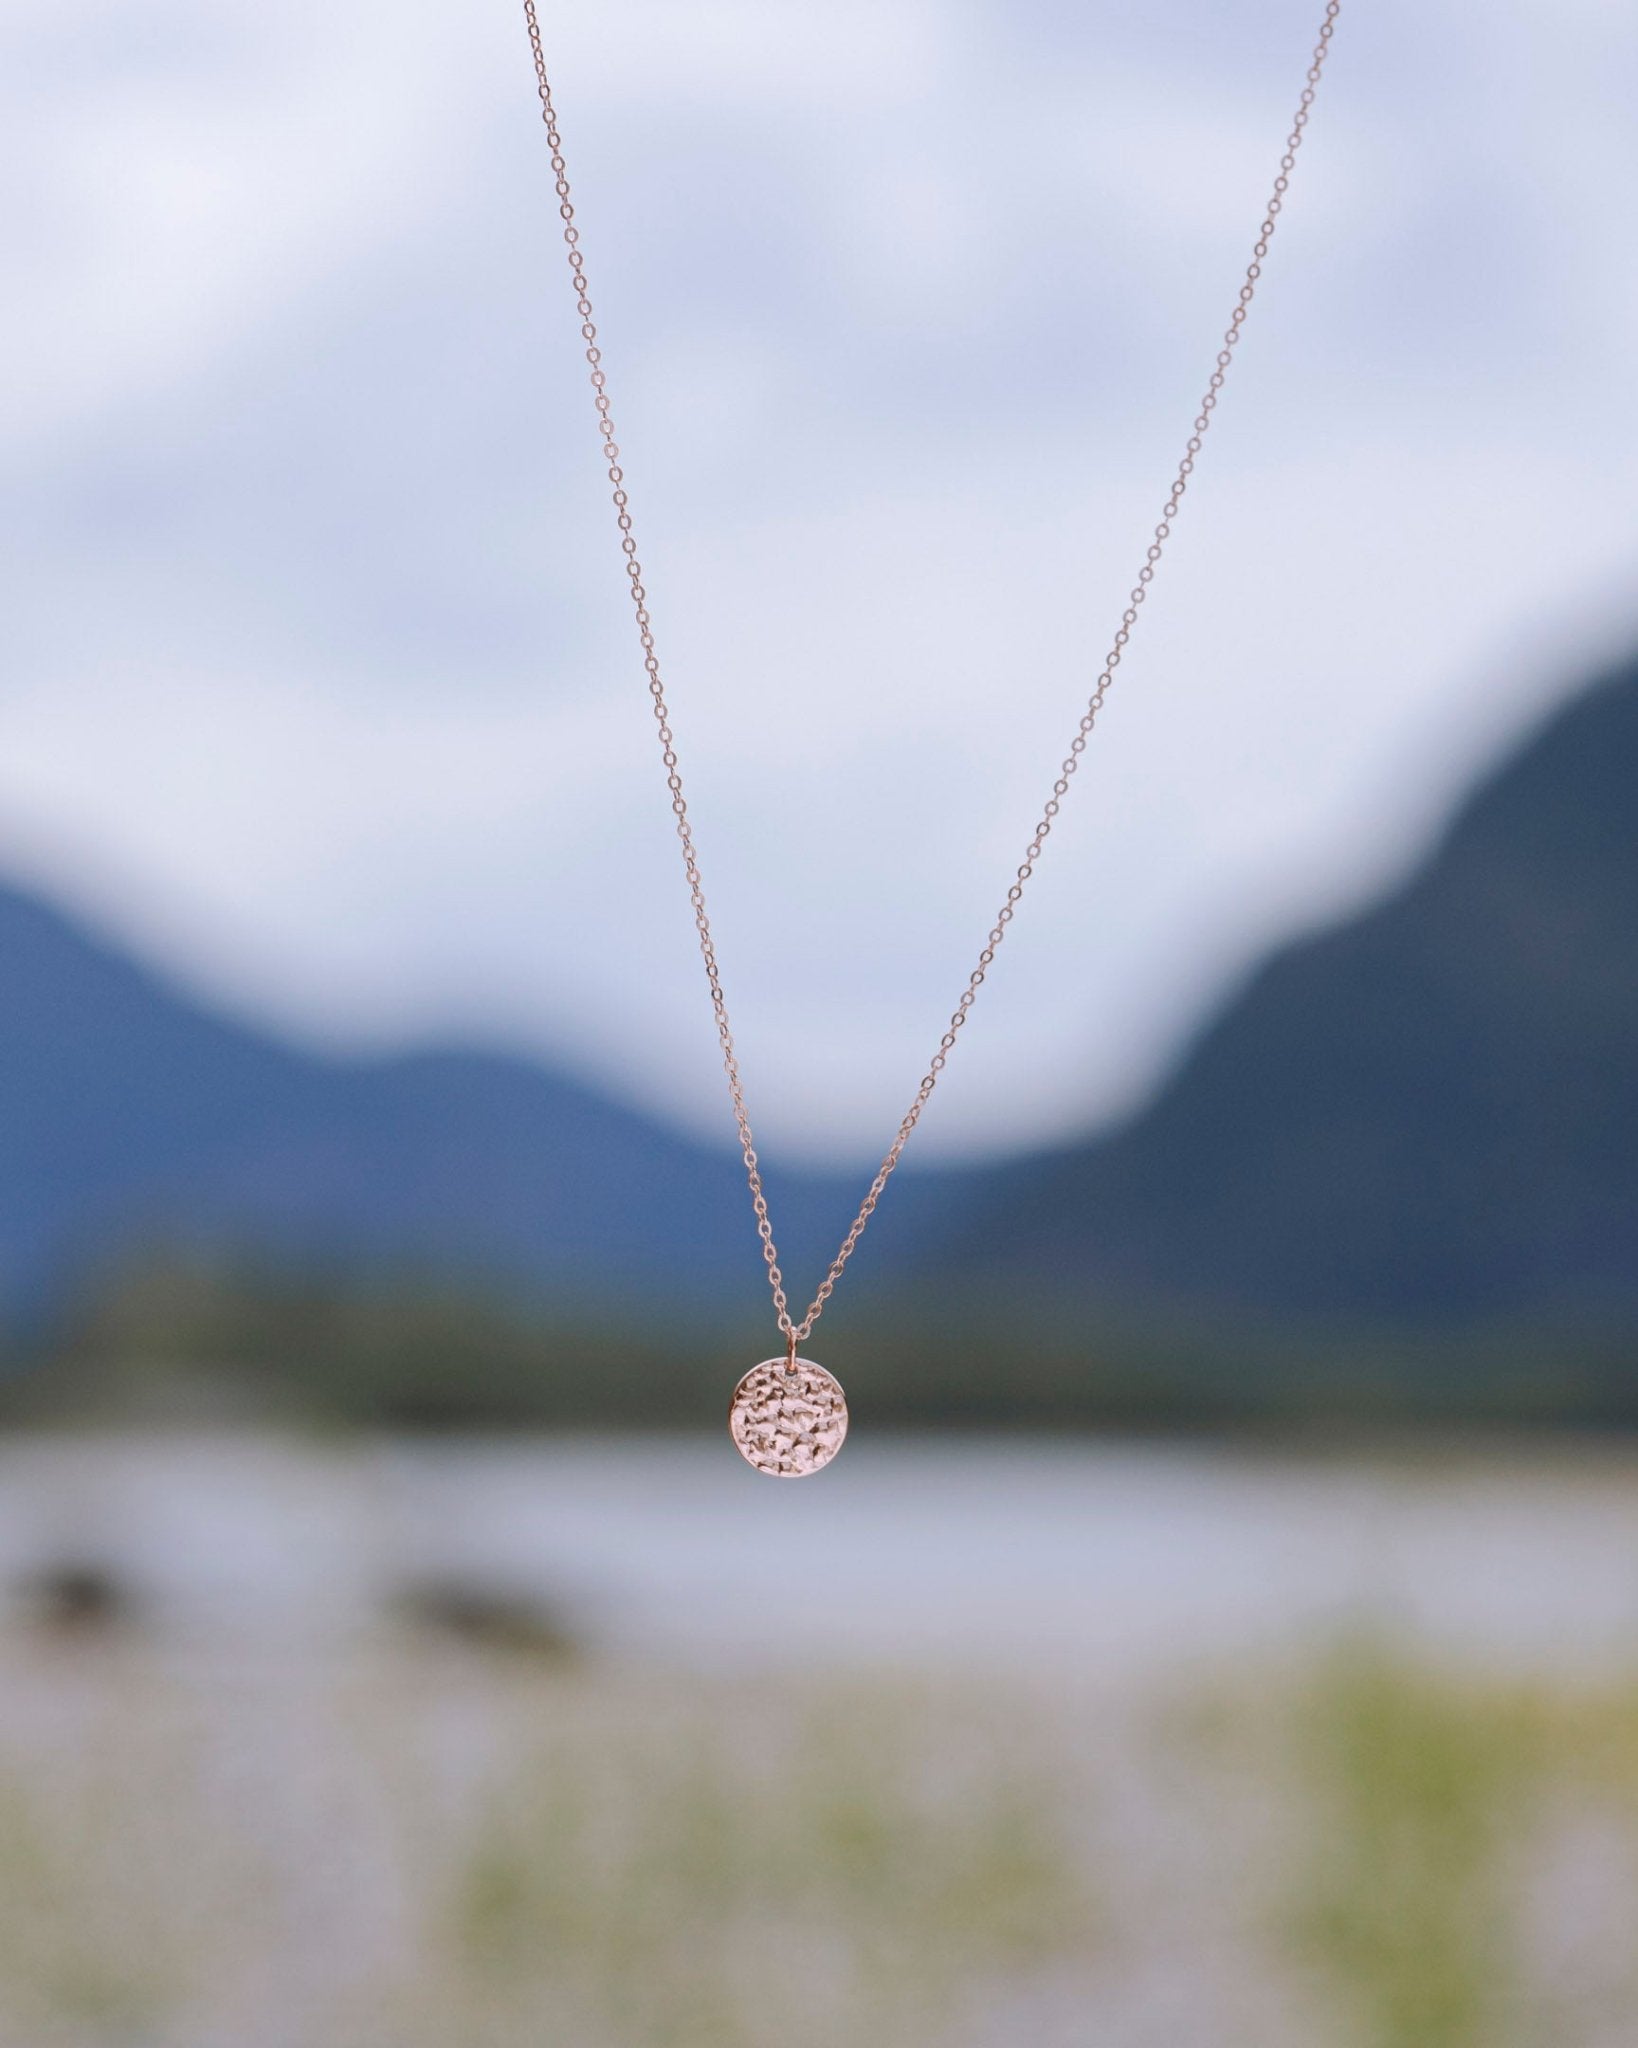 18k rose gold plated Sol Textured Small Circle Pendant Necklace on nature blur background - 1